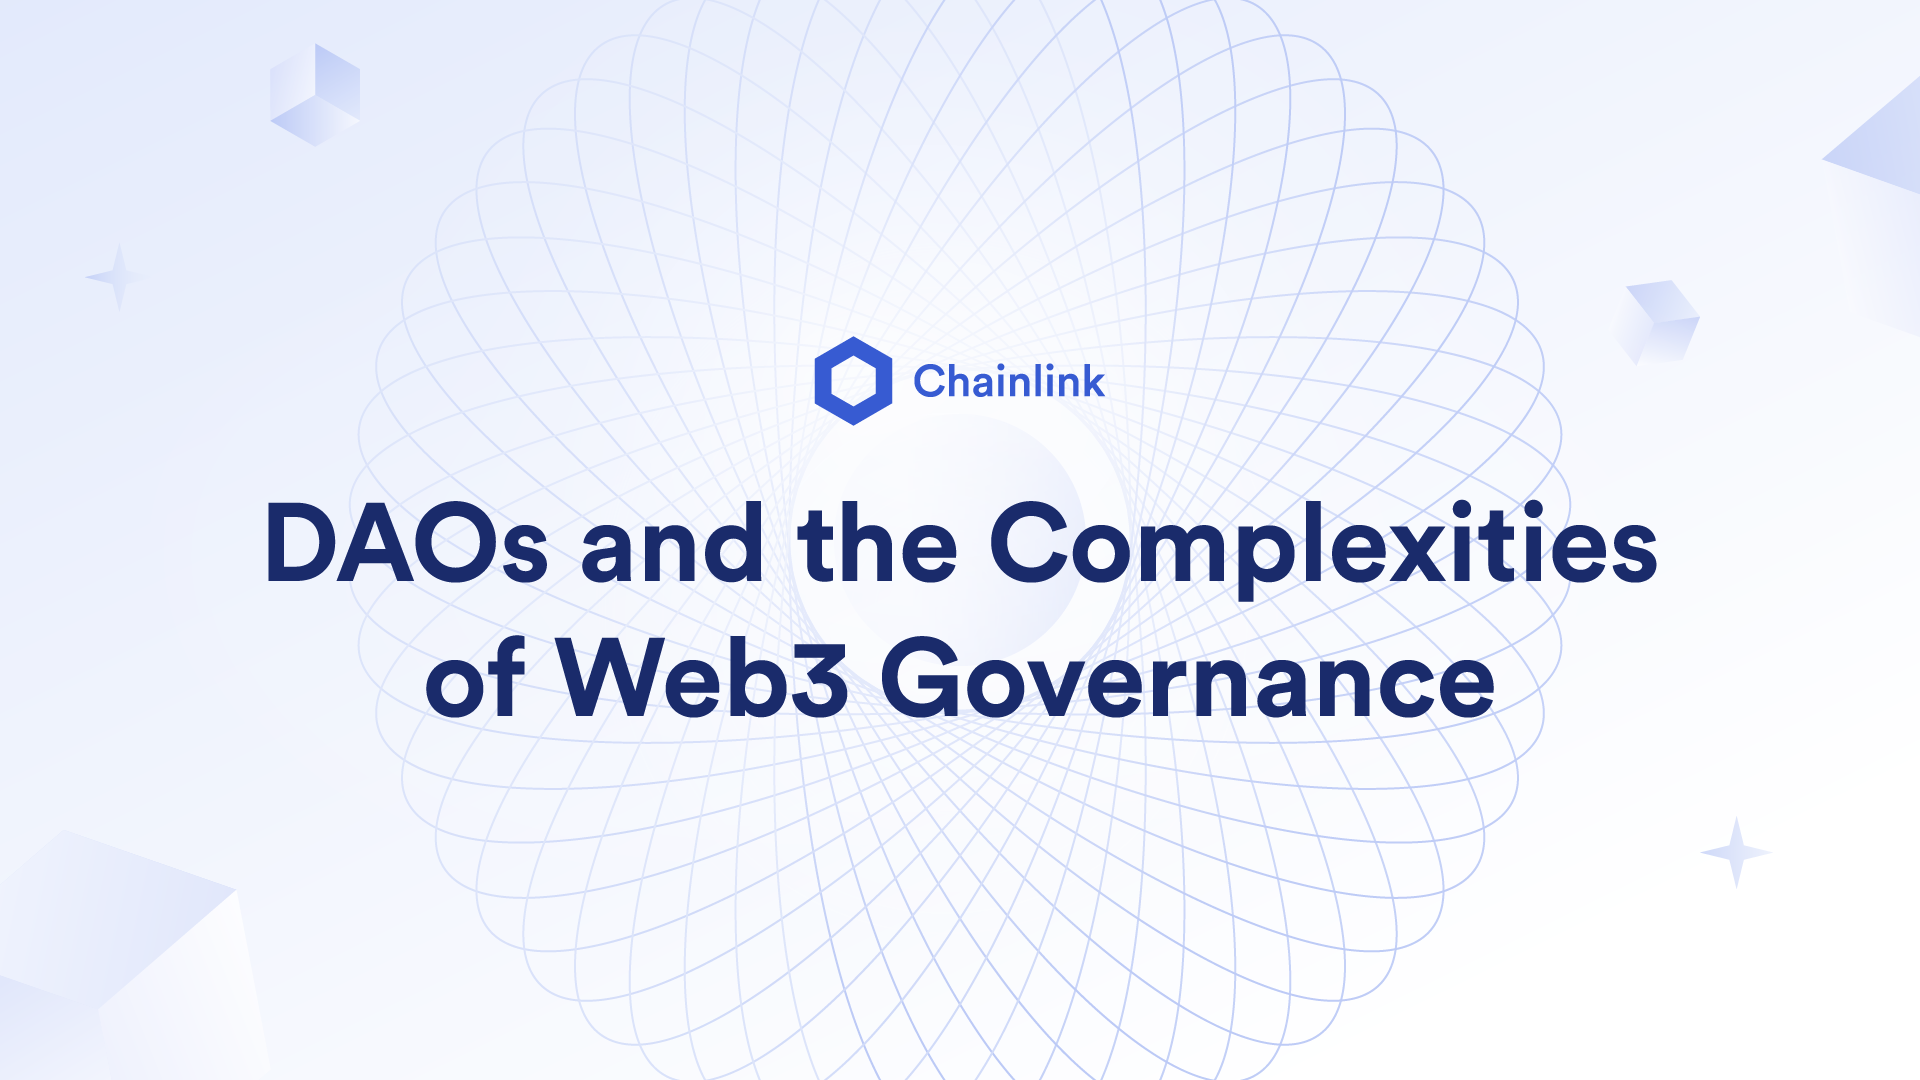 daos-and-the-complexities-of-web3-governance-chainlink-blog